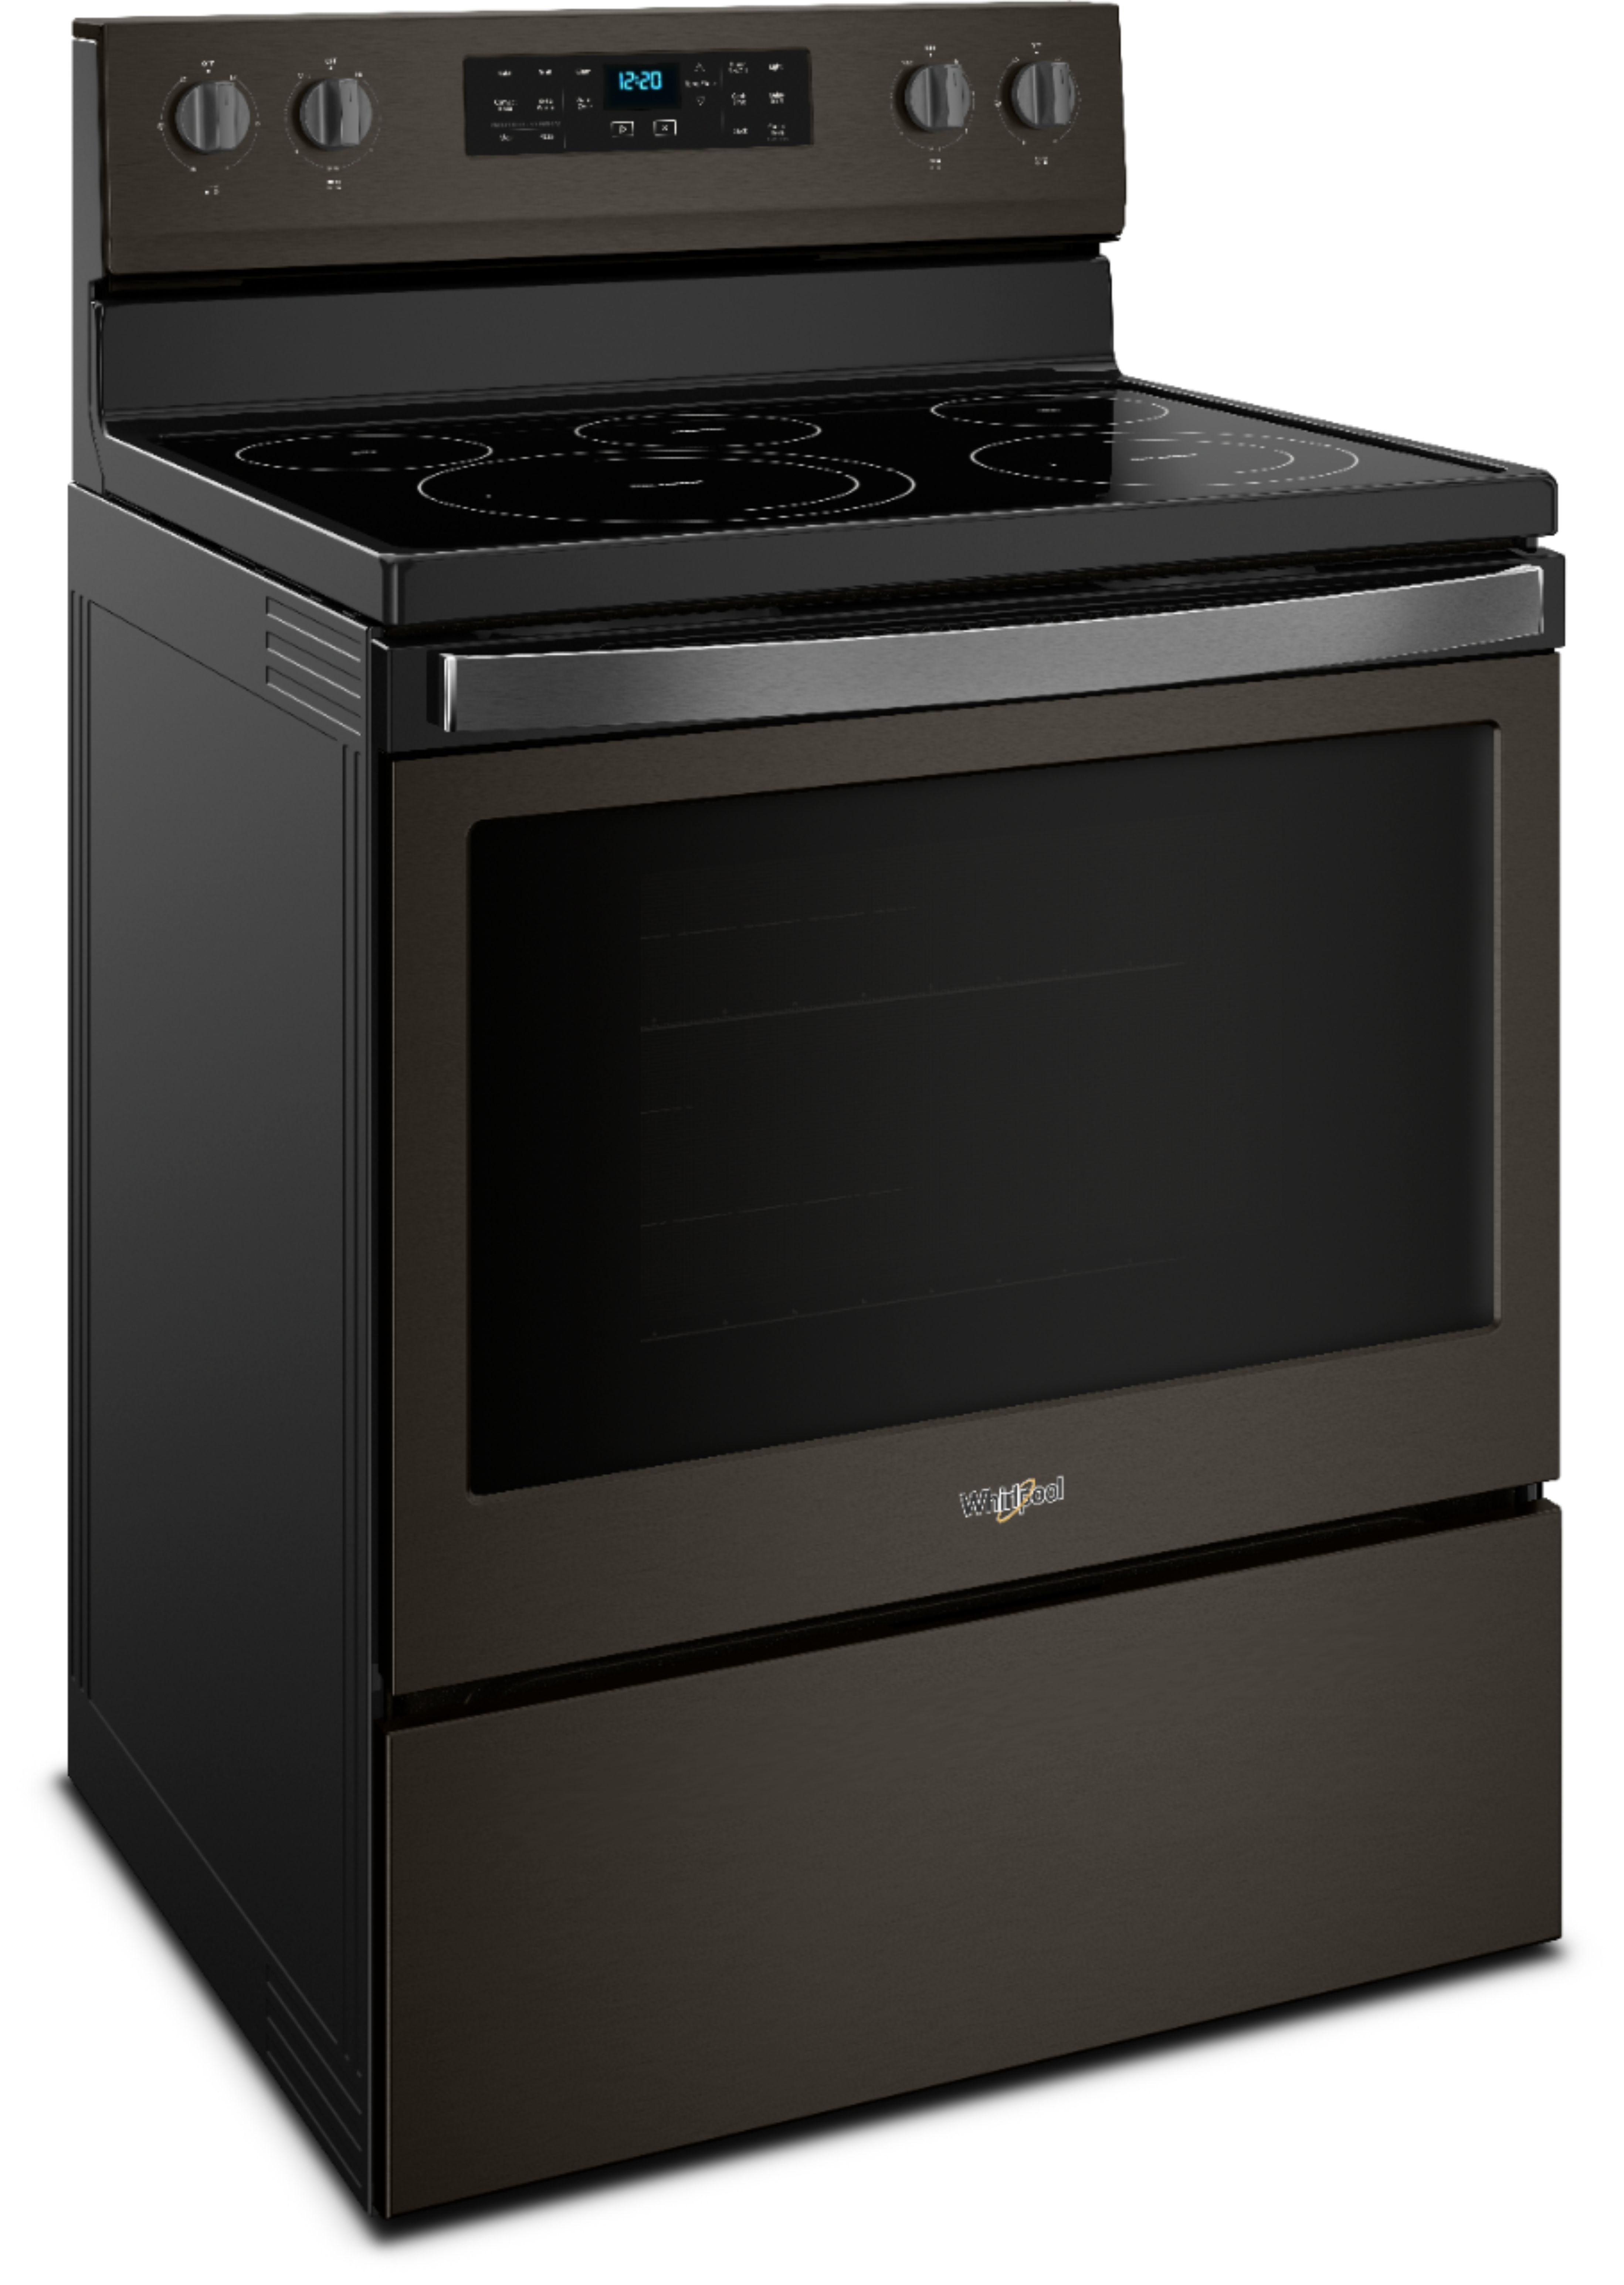 Angle View: Café - Modern Glass 6.6 Cu. Ft. Self-Cleaning Slide-In Double Oven Electric Convection Range - Platinum glass